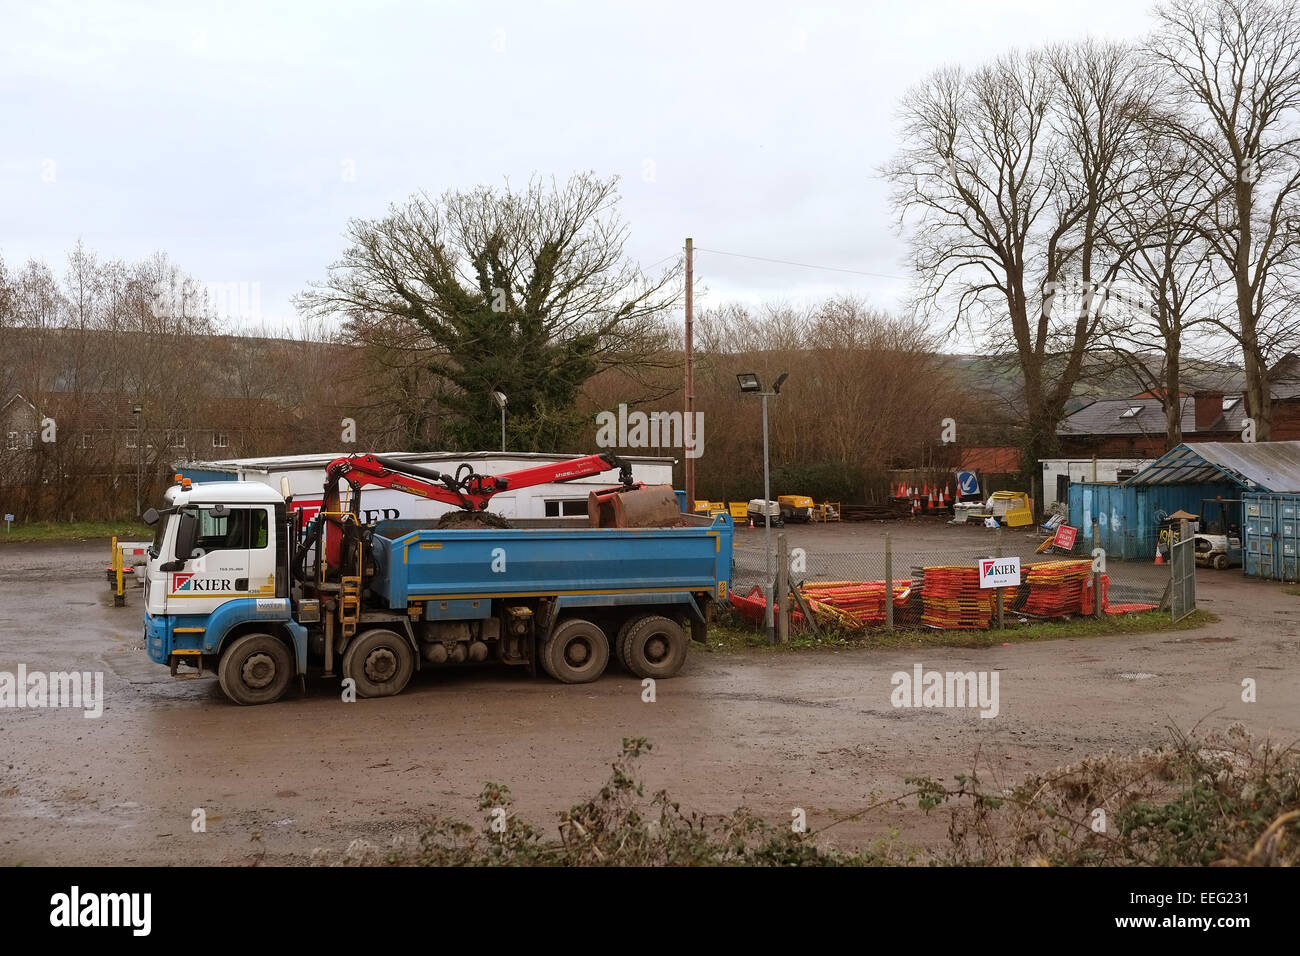 The Cheddar yard of Kier, who install services and infrastructure repairs. 17th January 2015 Stock Photo